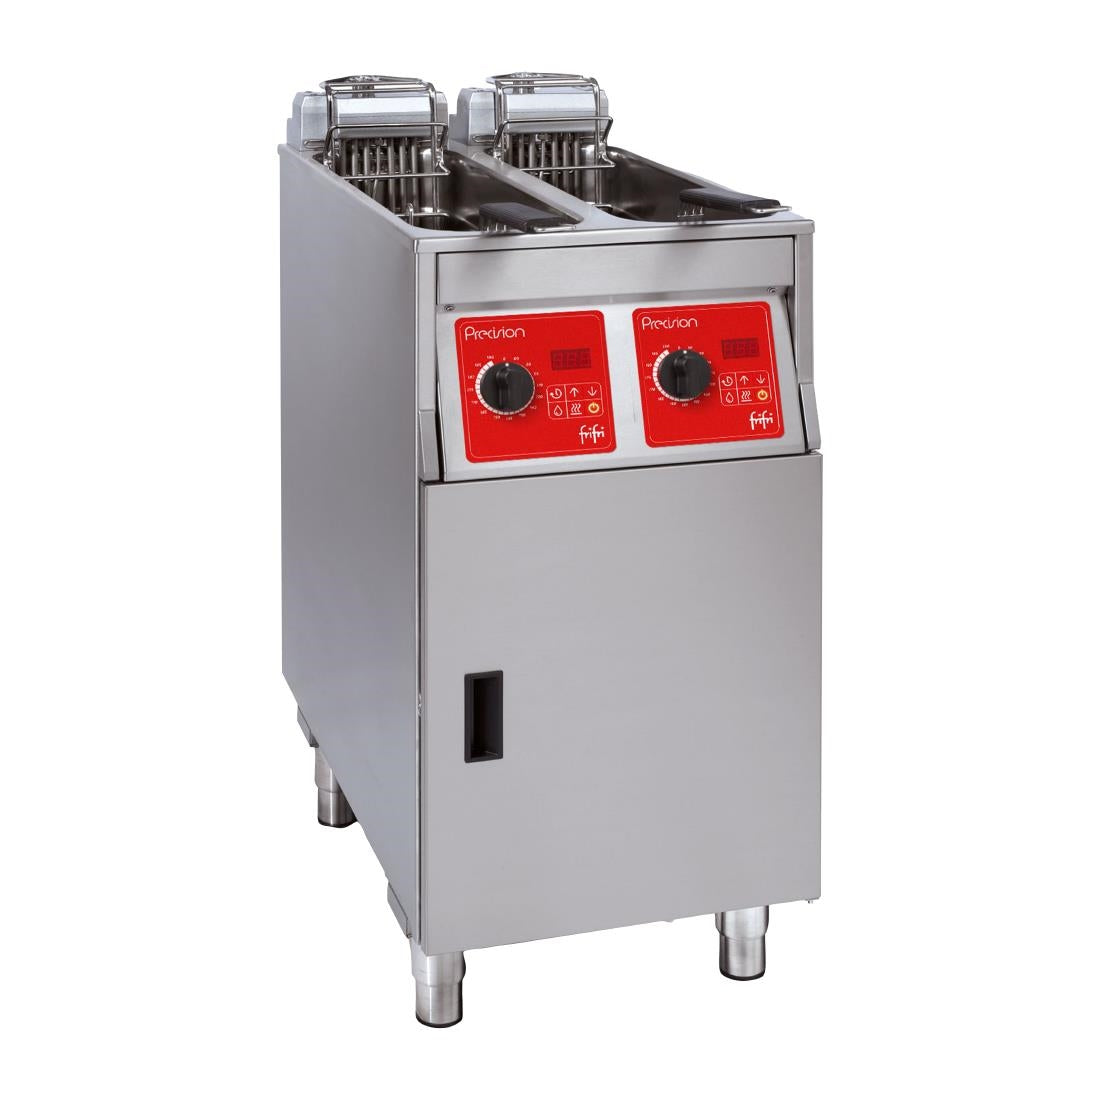 CX902 FriFri Precision 422 Electric Free Standing Twin Tank Filtration Fryer PL422M32G0 JD Catering Equipment Solutions Ltd